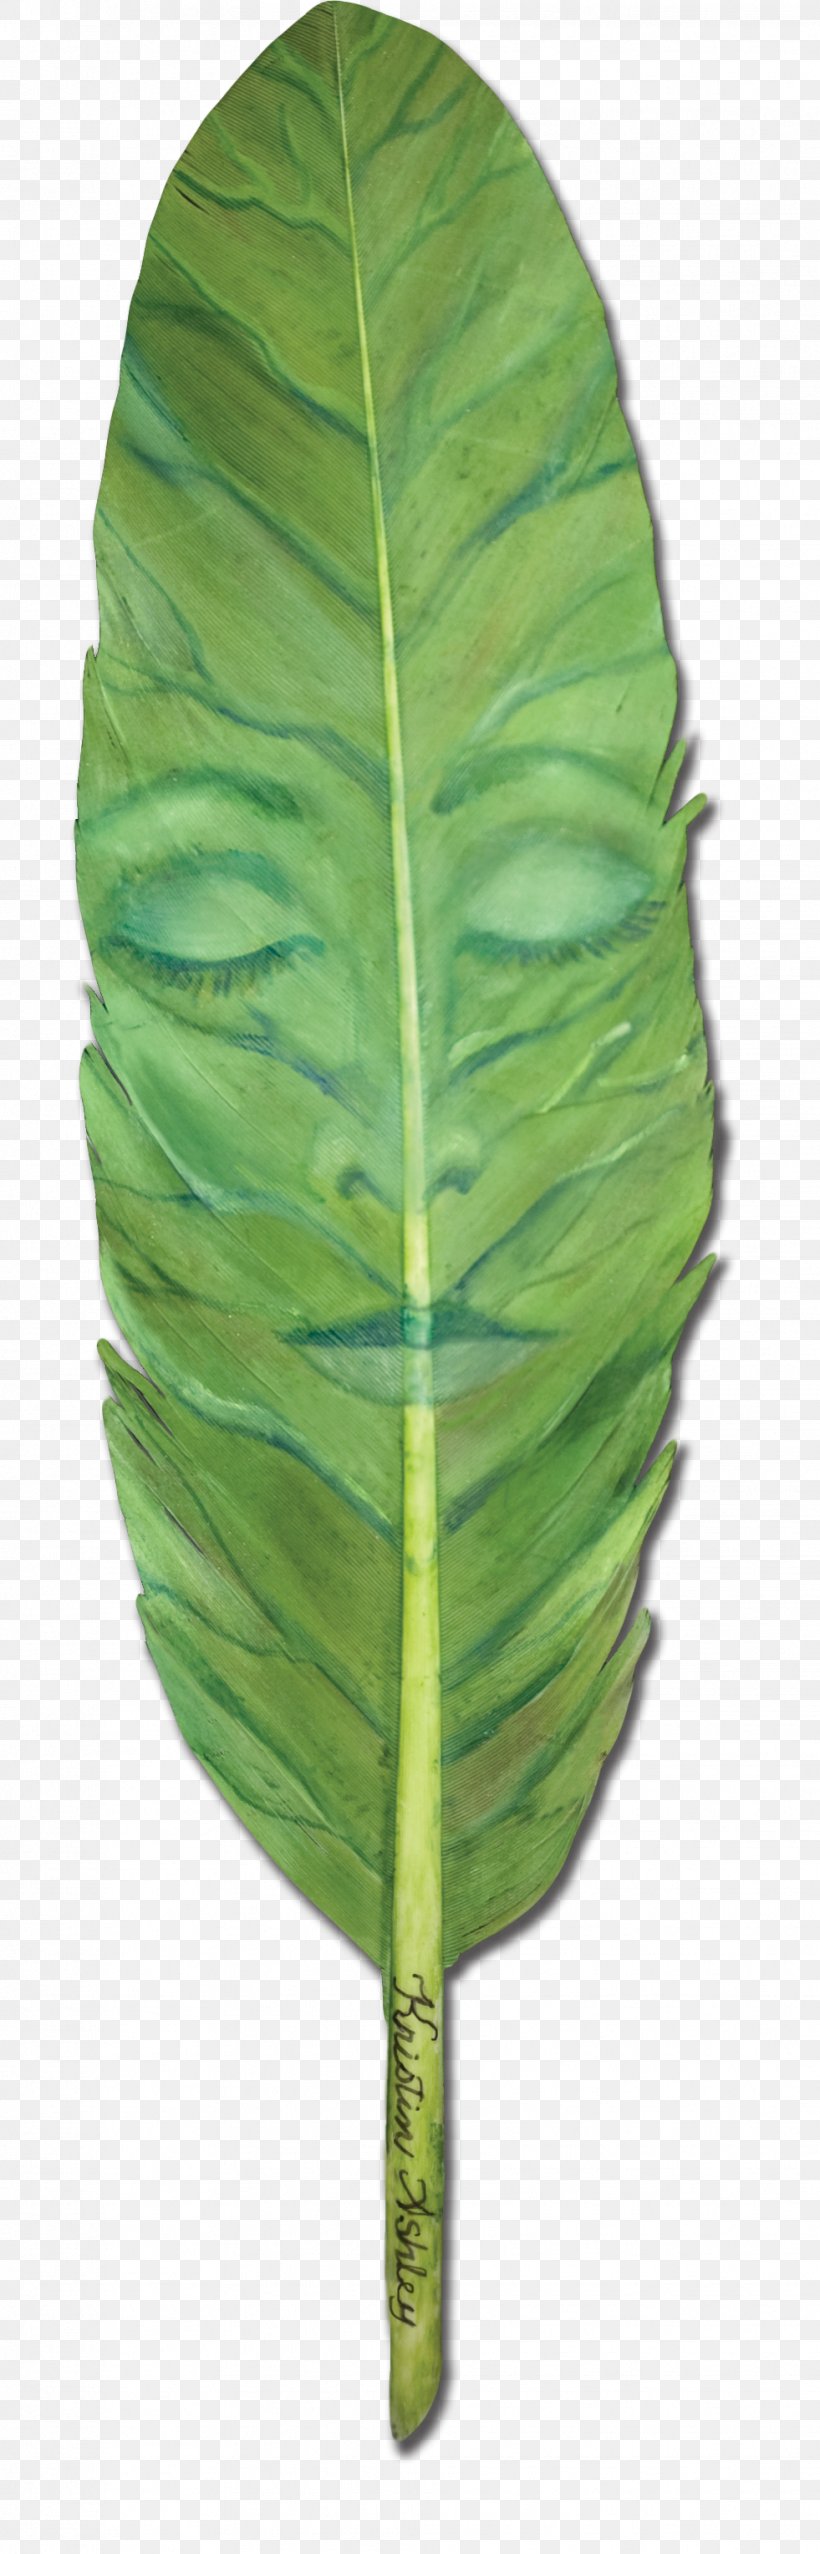 Leaf All Rights Reserved Email Plant Stem, PNG, 981x3056px, Leaf, All Rights Reserved, Email, Face, Feather Download Free